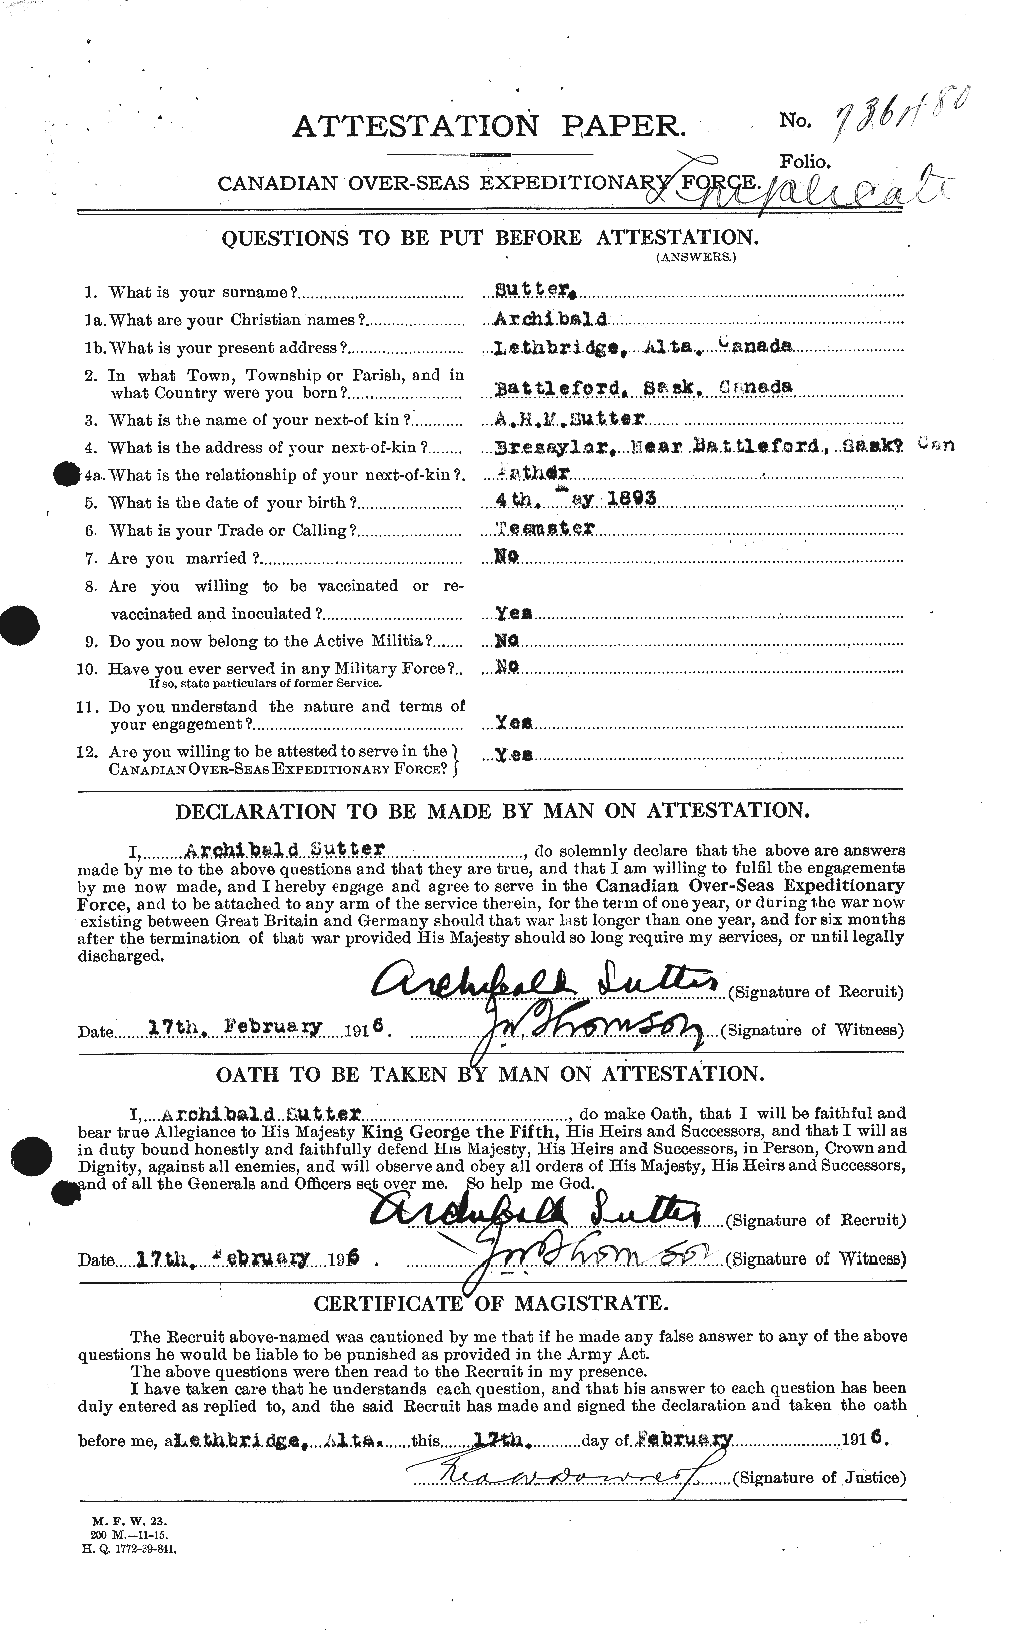 Personnel Records of the First World War - CEF 126336a